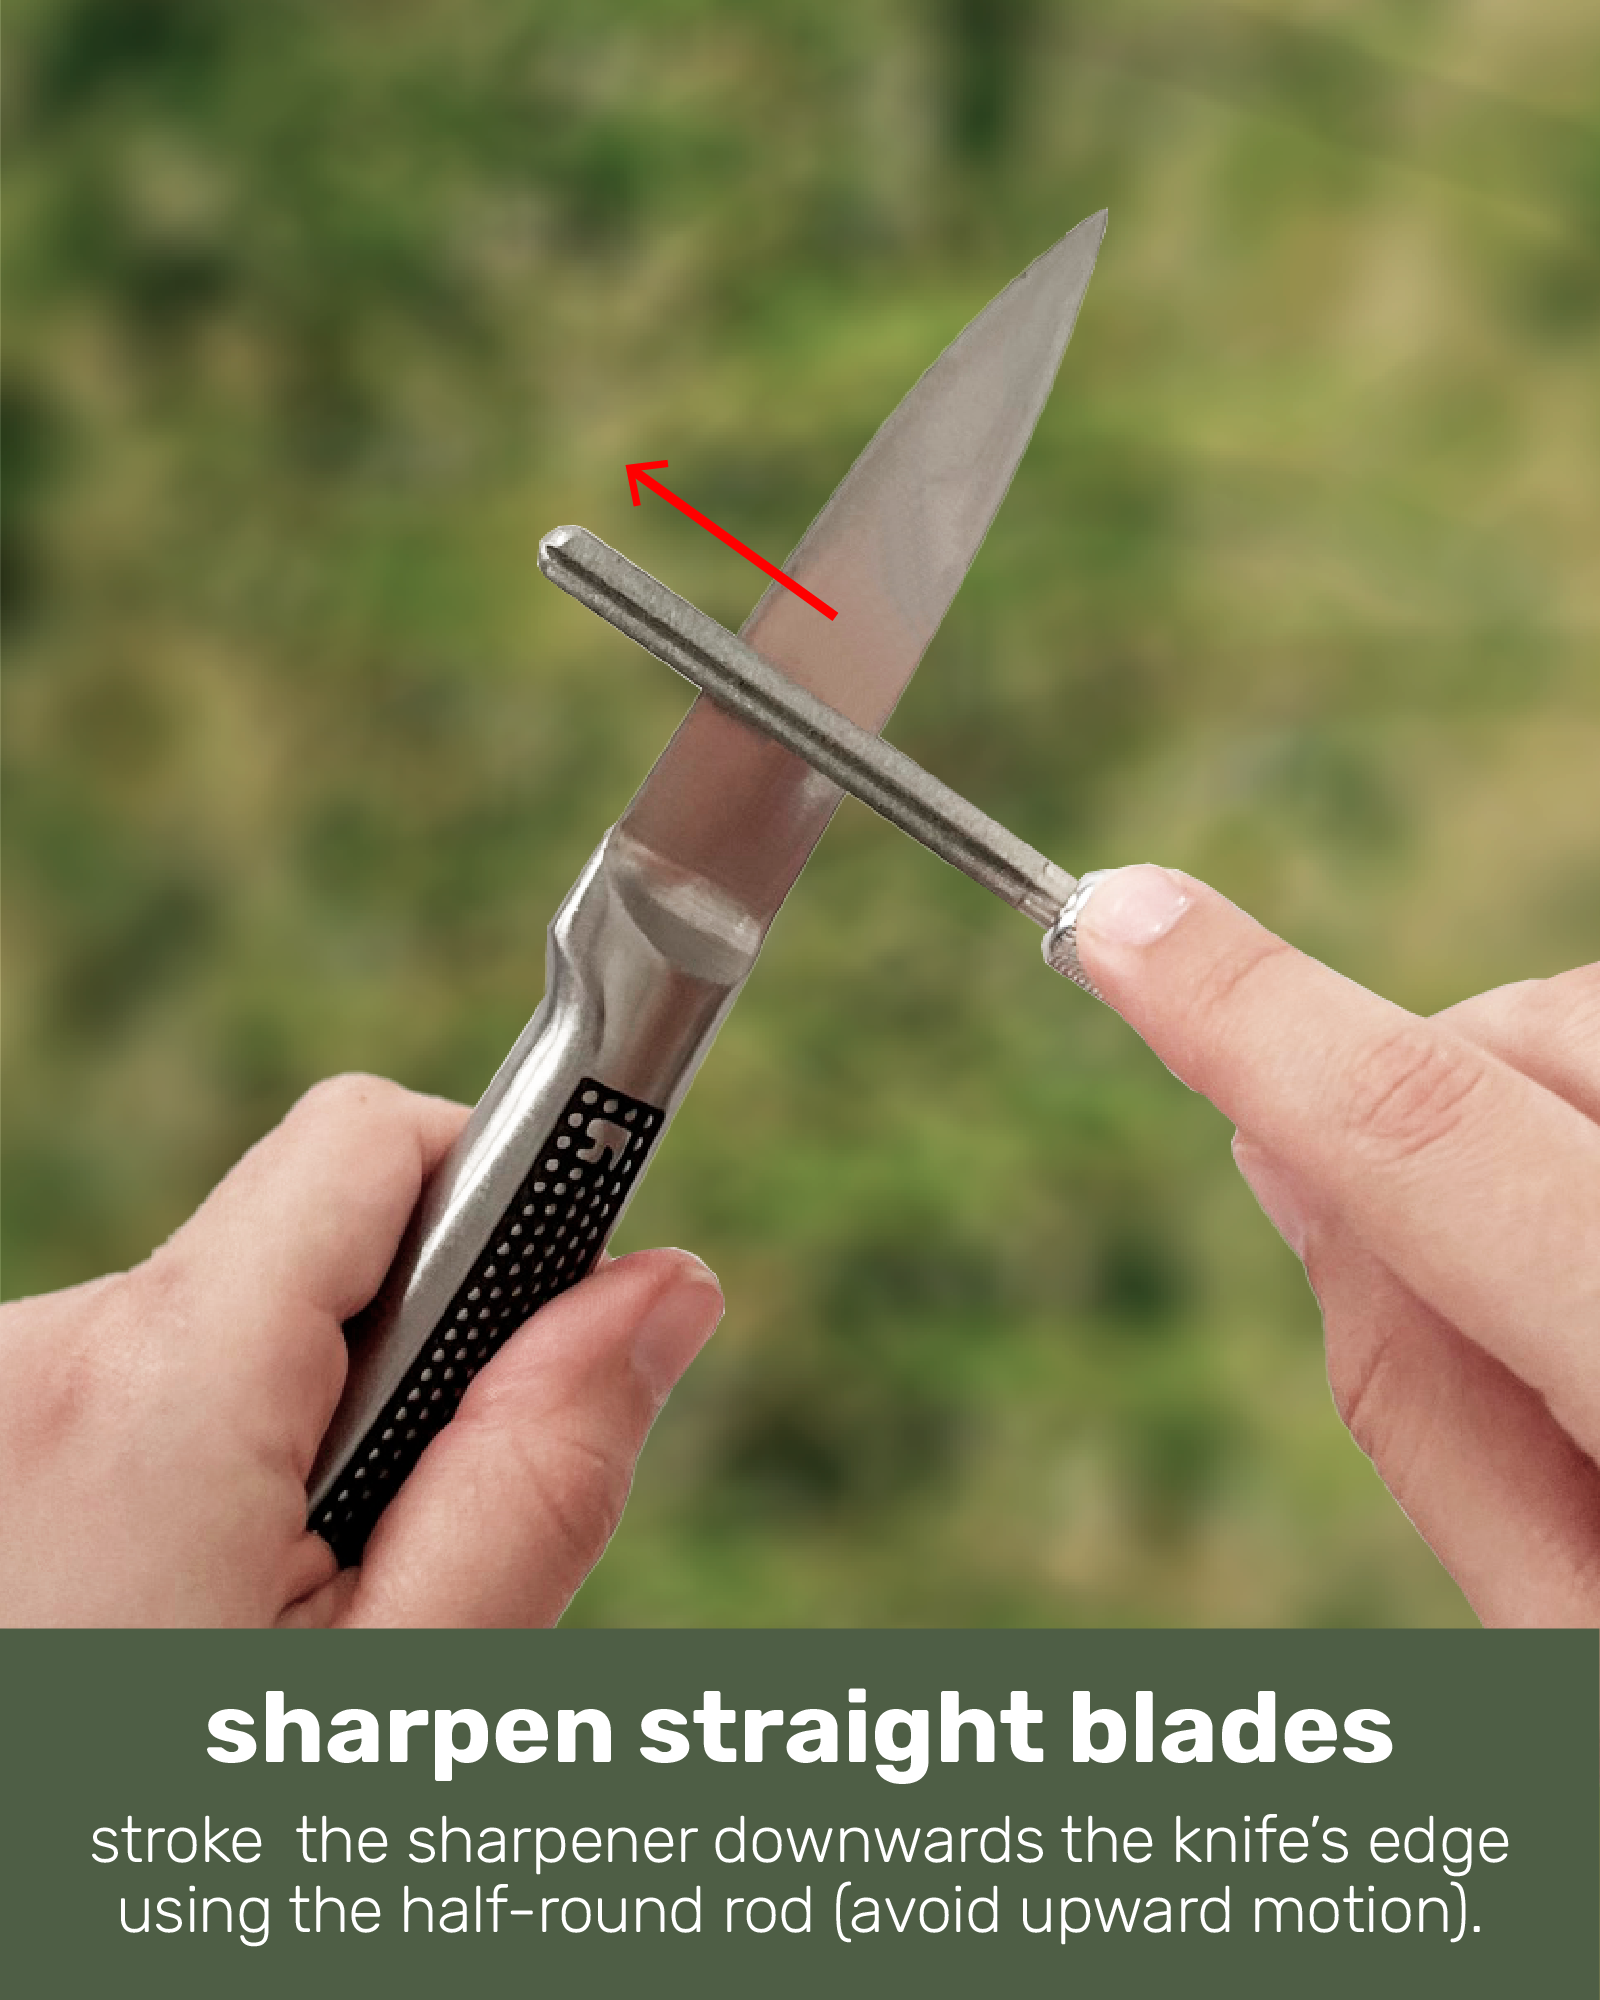 Wamery Knife Sharpener and Scissors Sharpening SYSTEM. Easy to Use. Safe Handle.